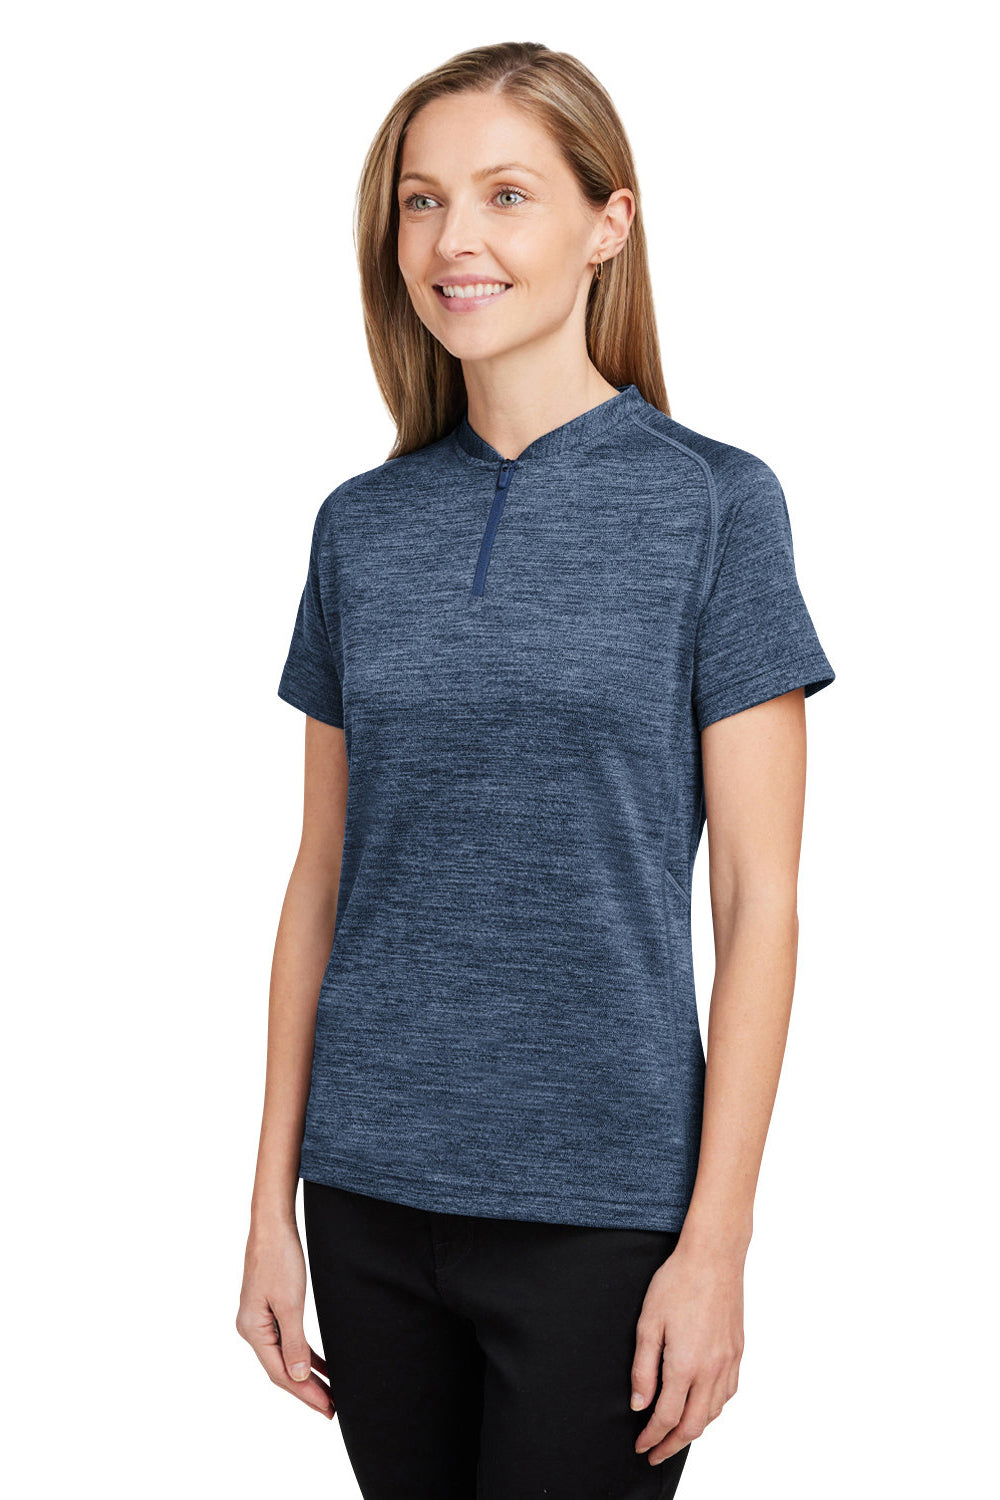 Spyder S17980 Womens Mission Blade Short Sleeve Polo Shirt Frontier Blue 3Q